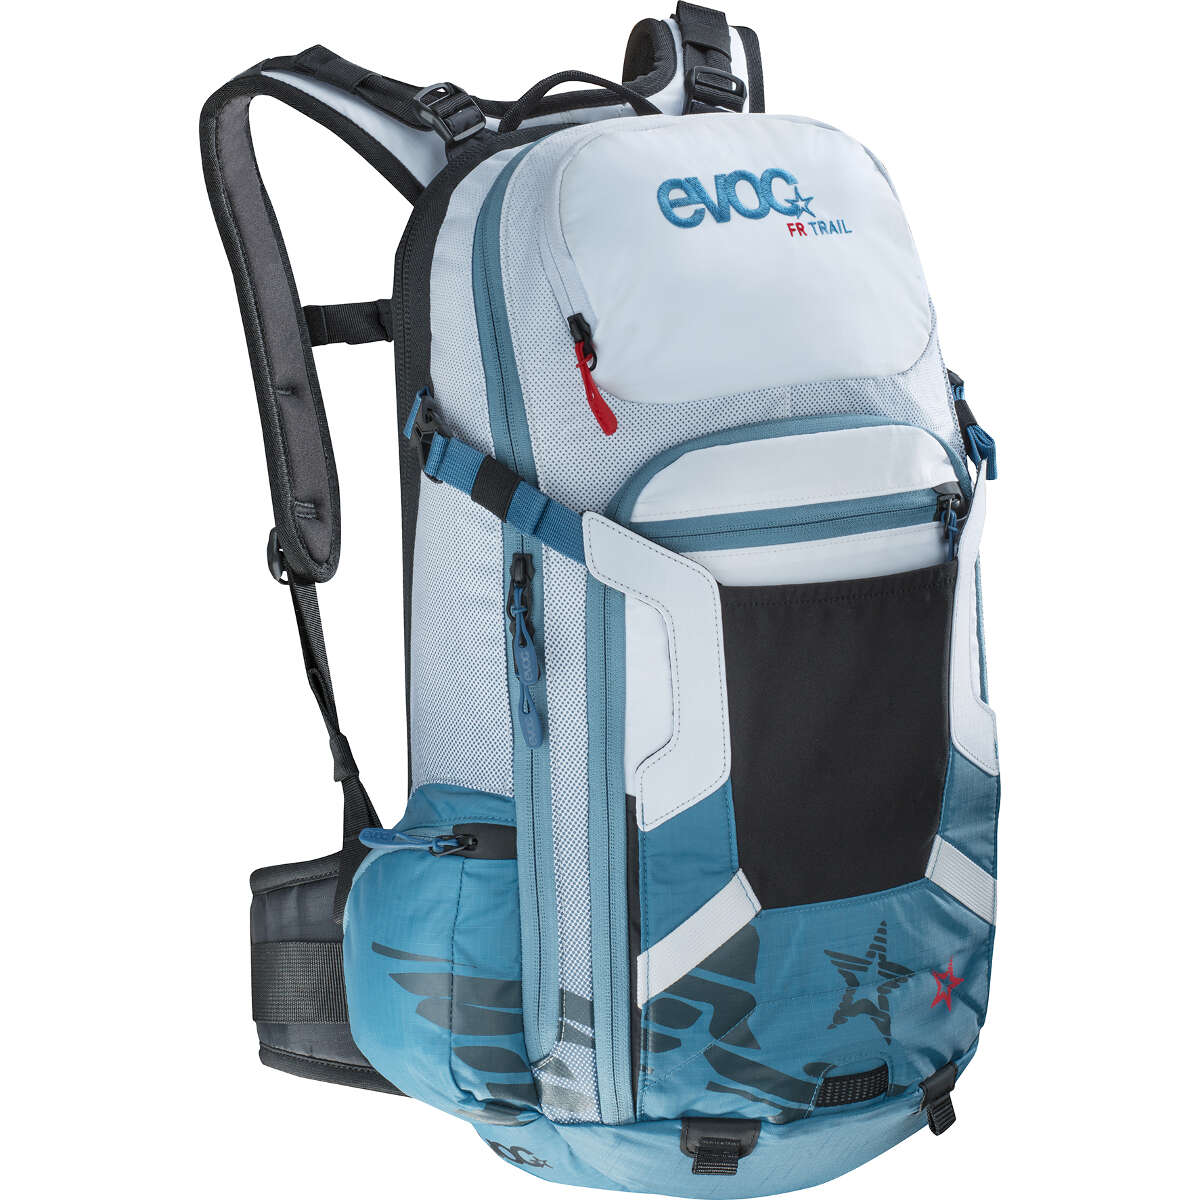 Evoc Girls Protector Backpack with Hydration System Compartment FR Trail Blue/White, 20 Liter